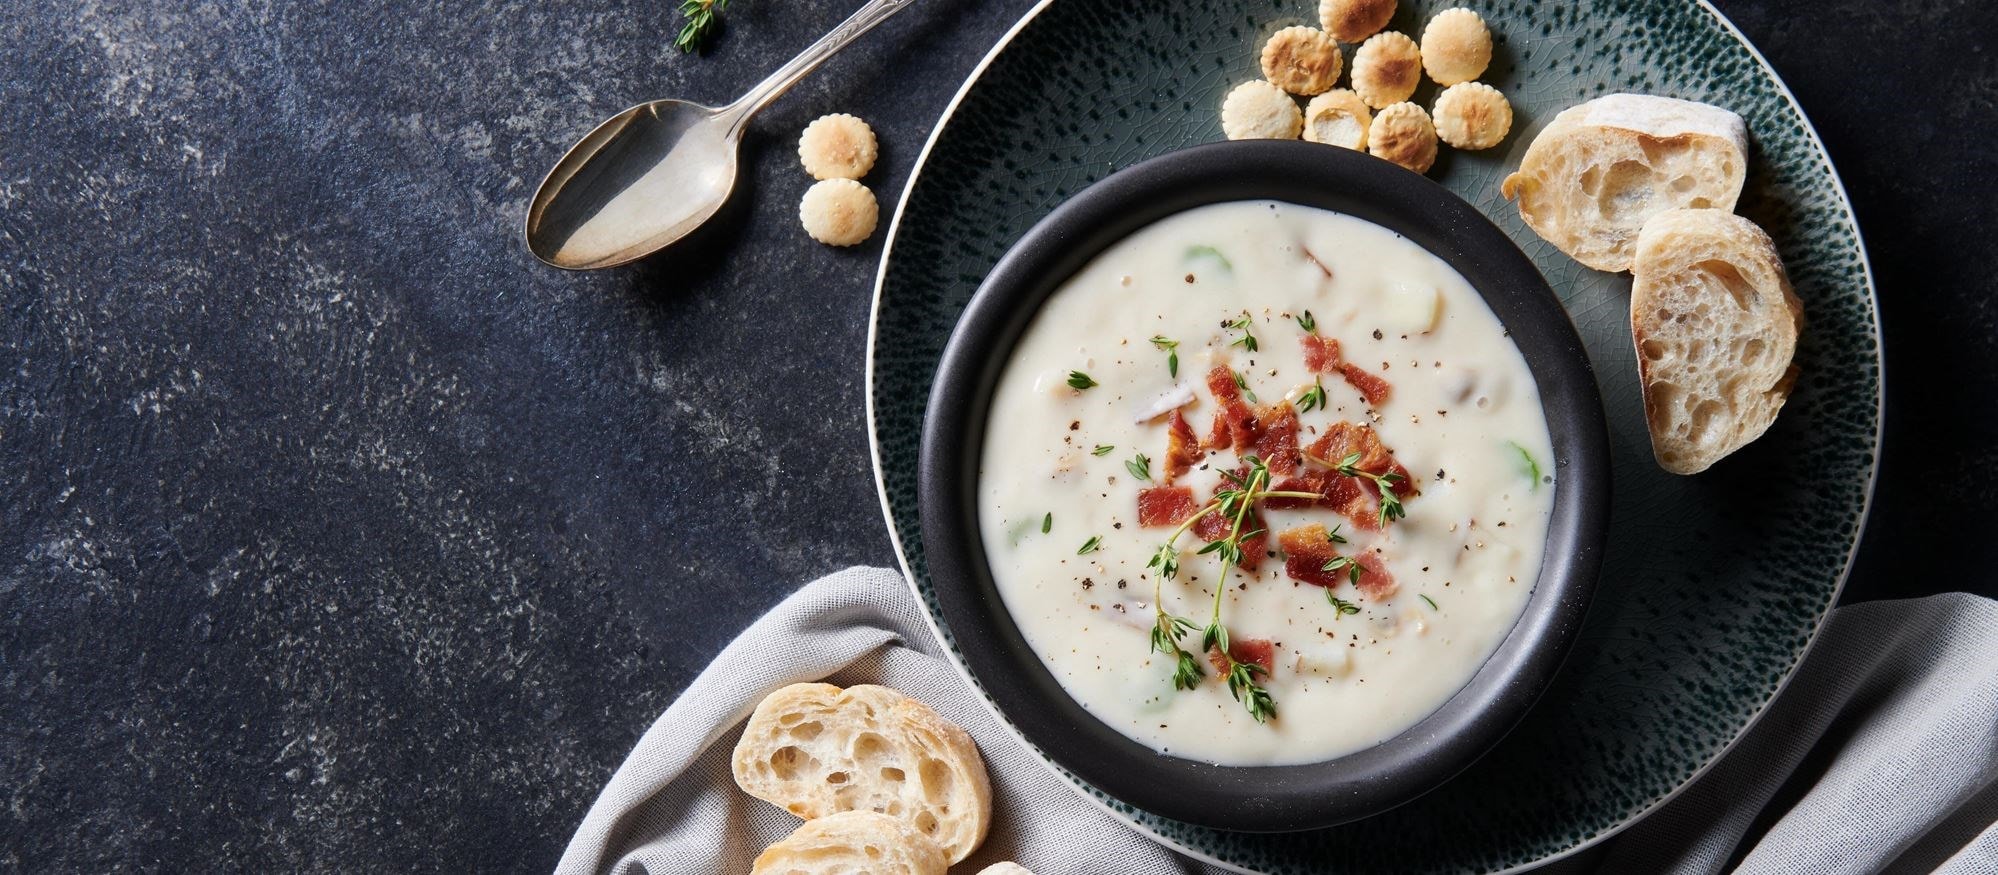 Easy and delicious New England Clam Chowder  recipe using the Simmer Mode setting of your Wolf Oven